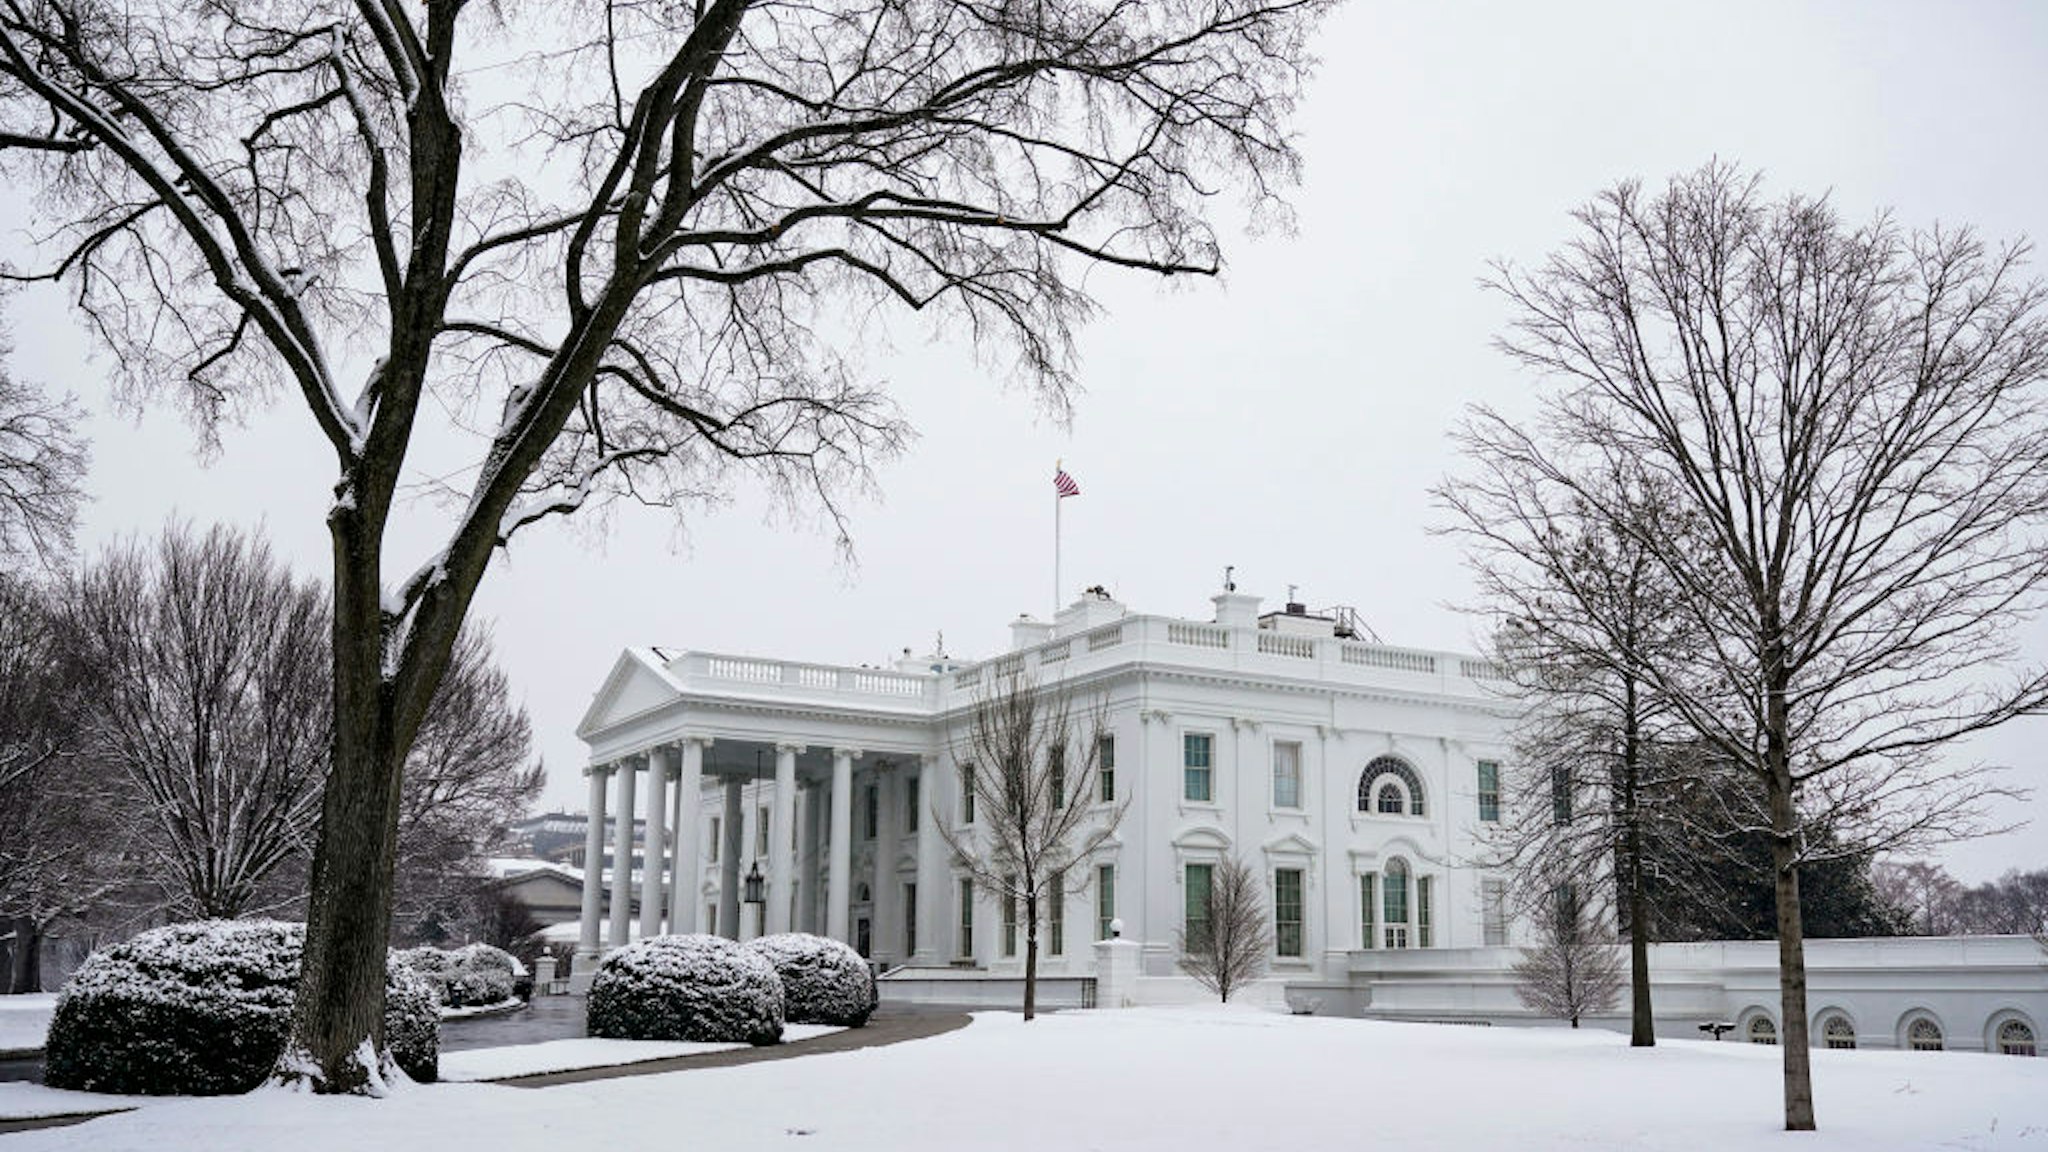 WASHINGTON, DC - JANUARY 31: The White House ground are covered in snow during a snow storm on January 31, 2021 in Washington, DC. Washington is expecting 3 to 5 inches of snow during the first major snow storm of the year.